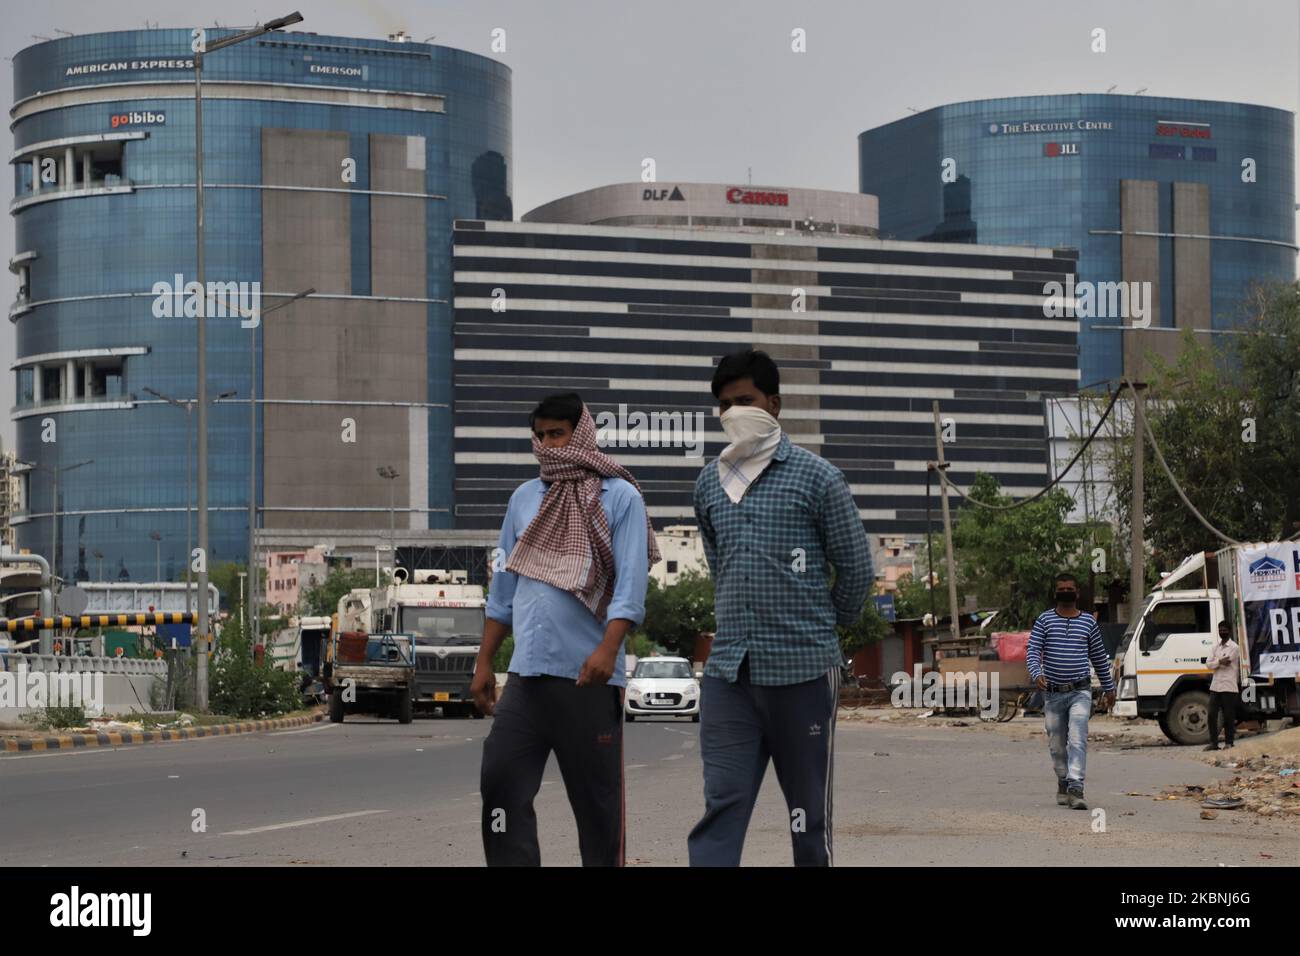 Indian men wearing face masks walk near DLF Building 5 amid COVID-19 coronavirus pandemic in Gurugram on the outskirts of New Delhi, India on 10 May 2020. DLF Cyber City houses some of the top IT and Fortune 500 companies. As one of the largest hives of IT activity in Delhi, it has been referred to as a â€œfuturistic commercial hubâ€. (Photo by Nasir Kachroo/NurPhoto) Stock Photo